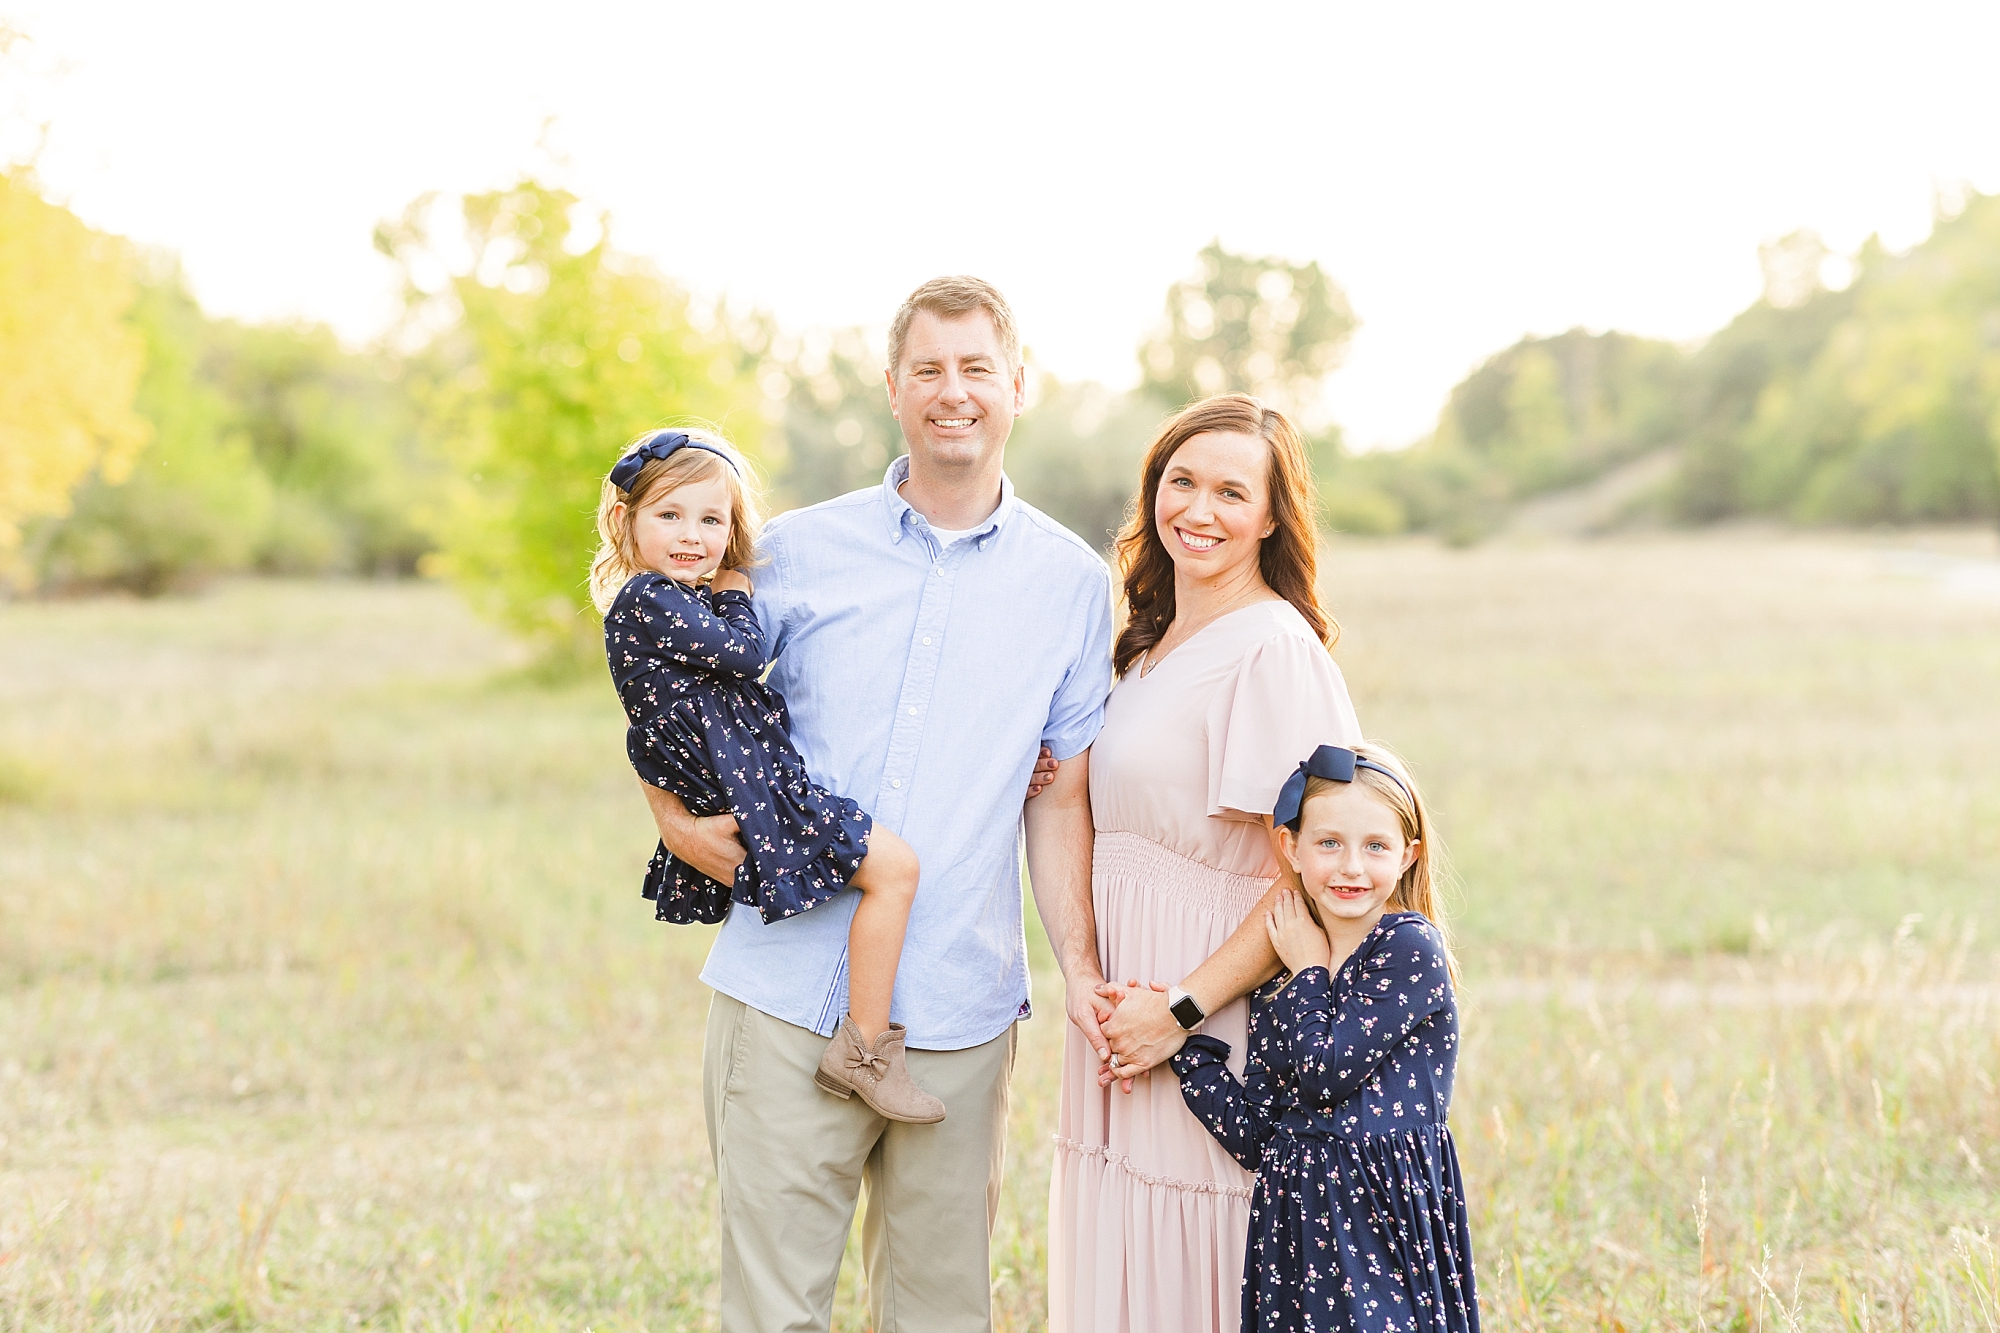 f you are looking for Park City family photography, I would love to talk to you! Fill out my contact form and let me know more about what you want to plan!